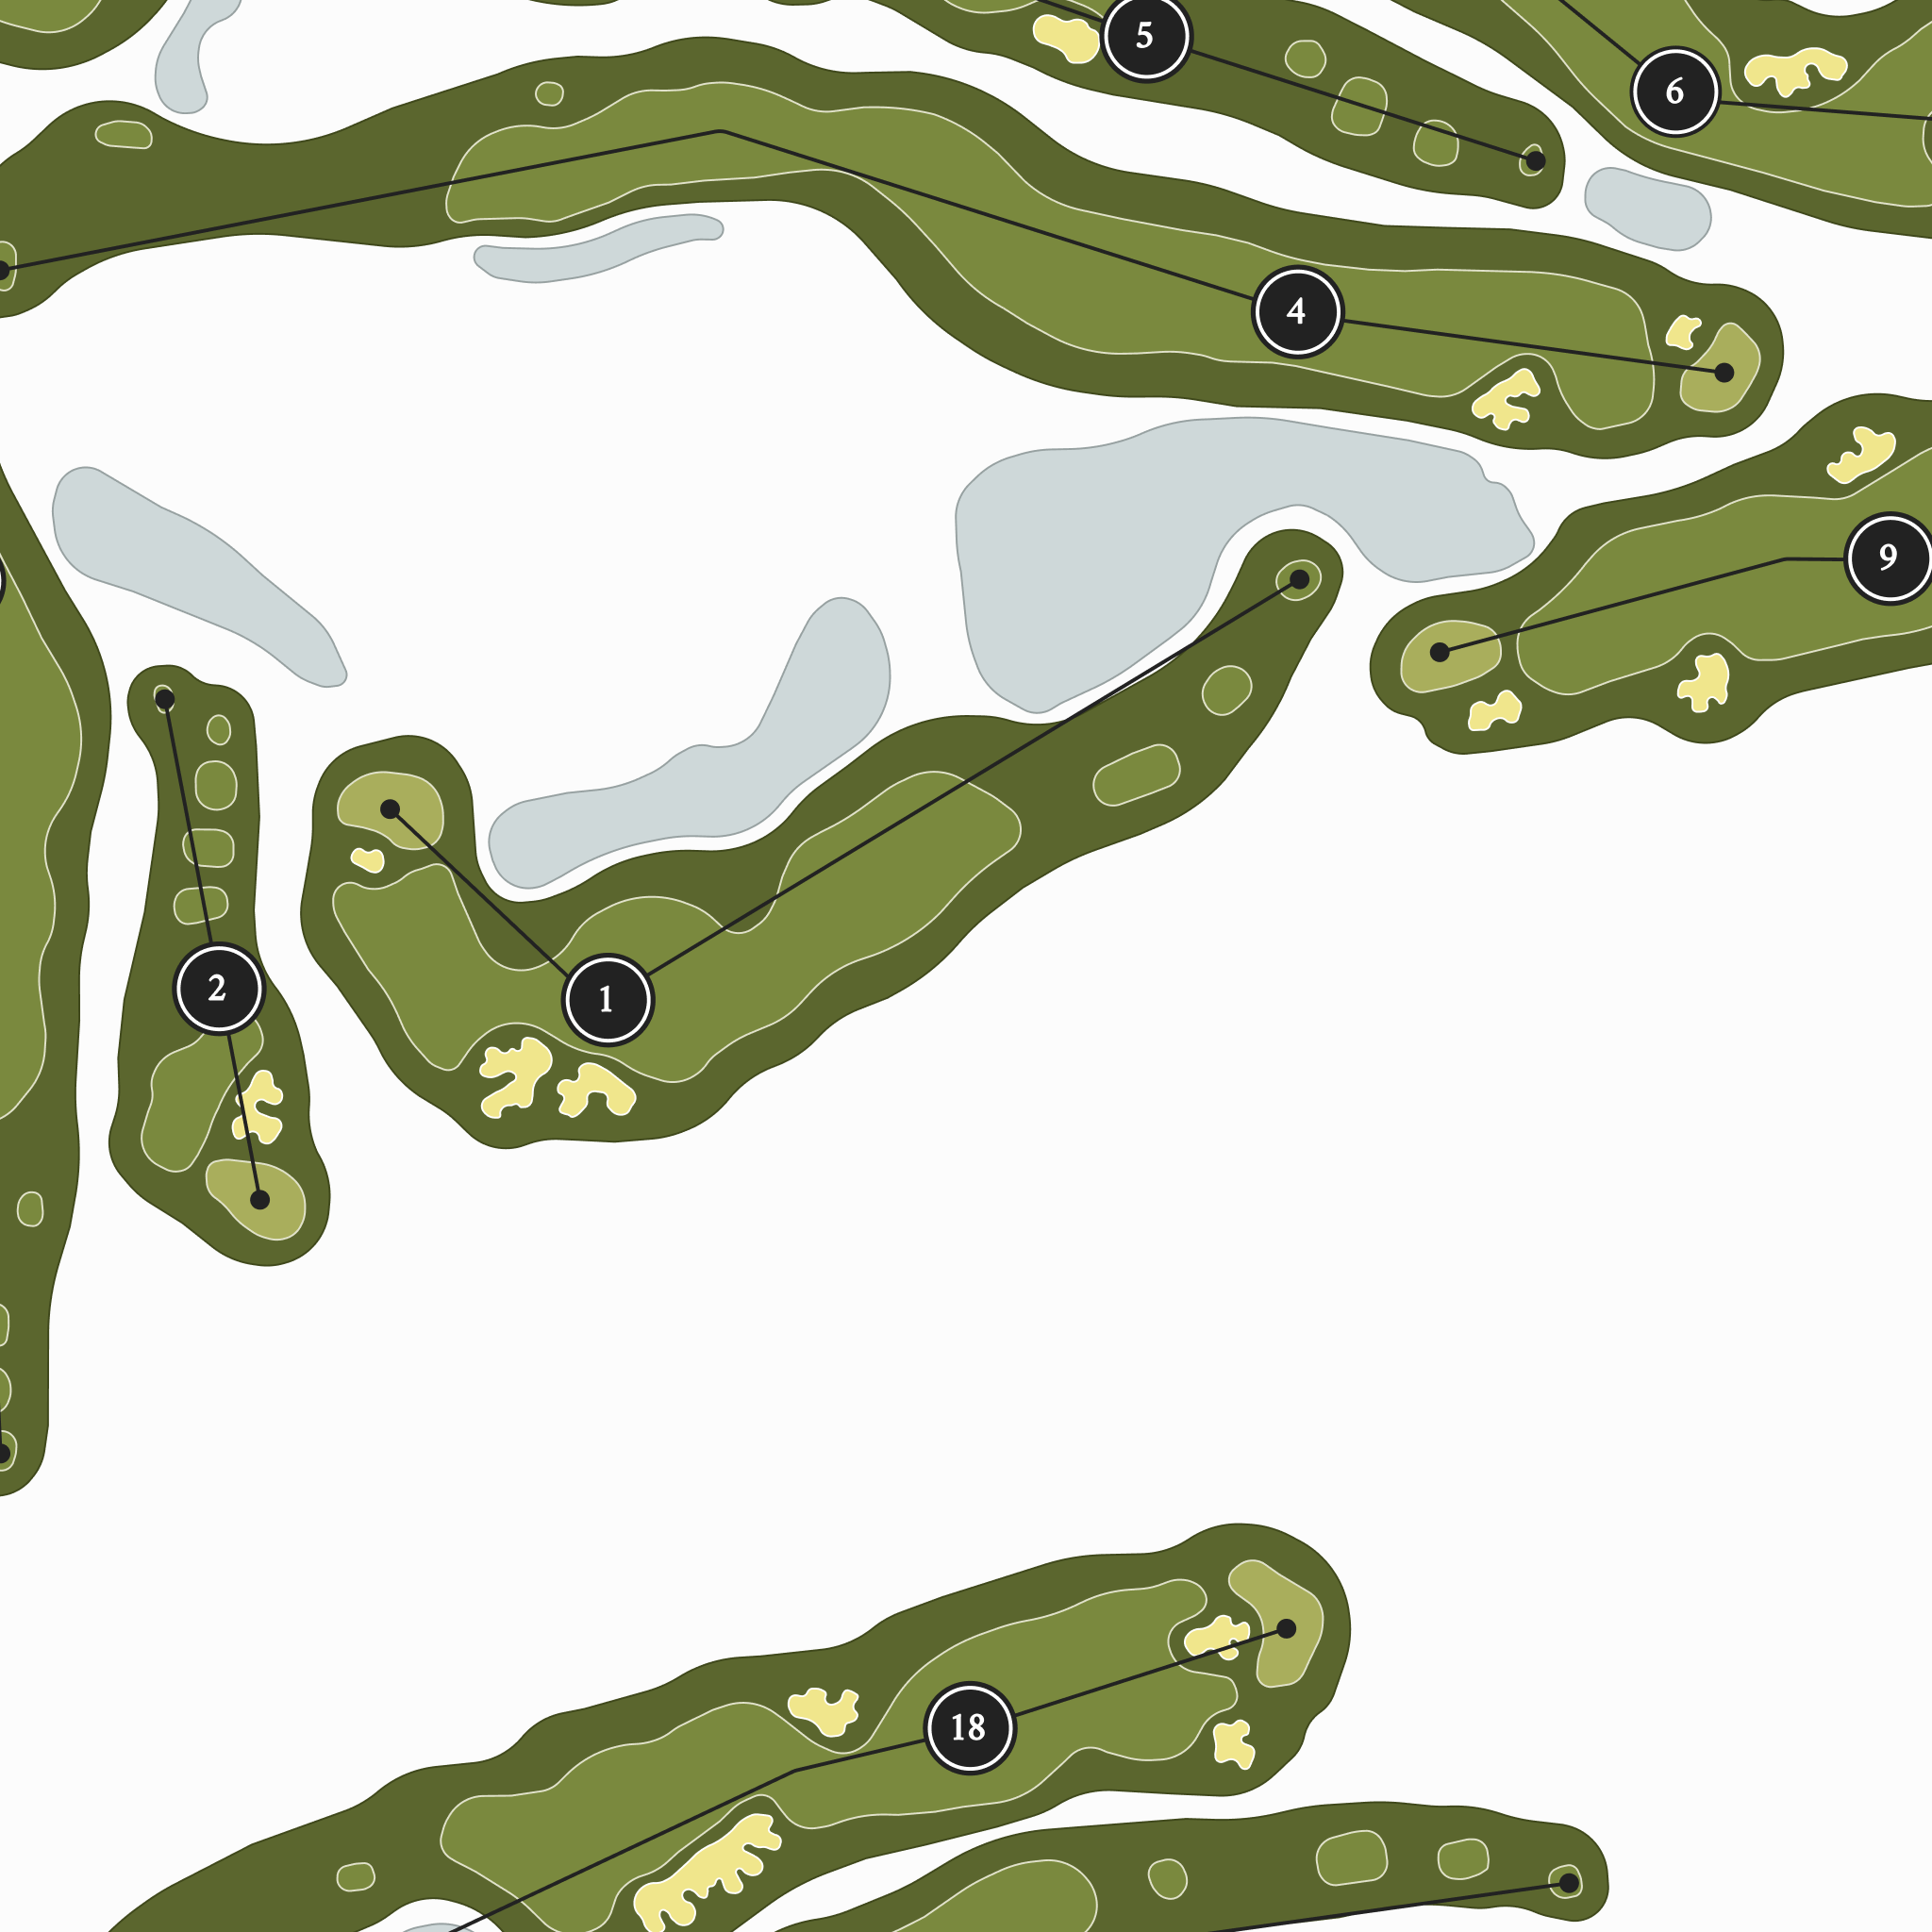 Blackstone Golf Club | Golf Course Map | Close Up With Hole Numbers #hole numbers_yes